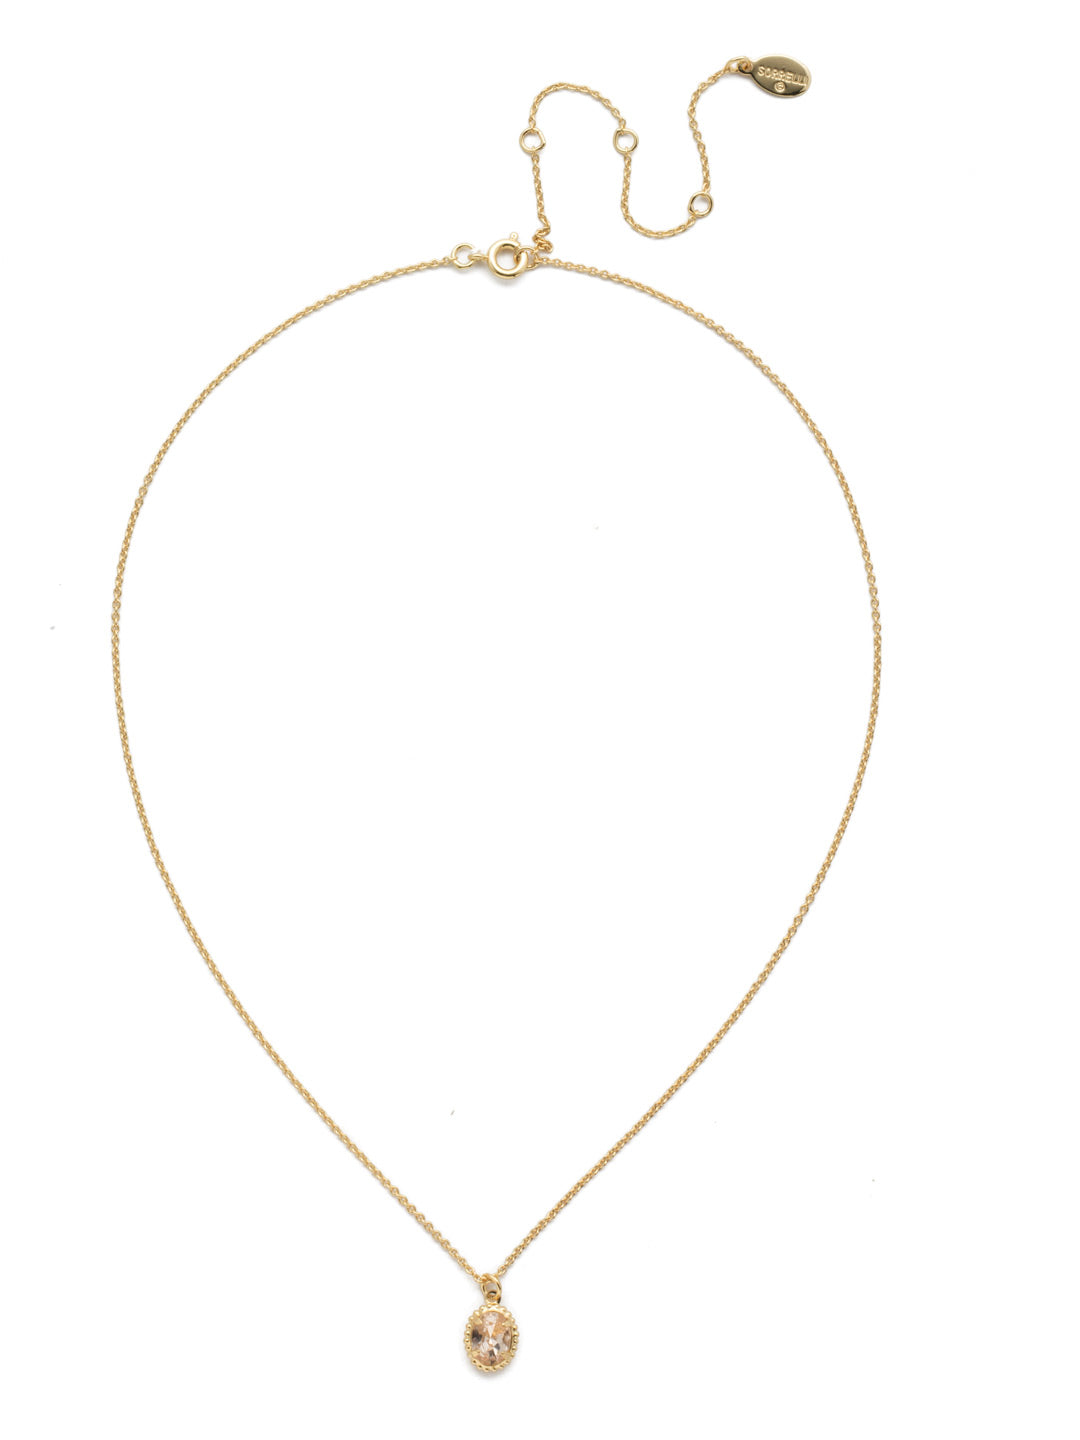 Maisie Pendant Necklace - NEF49BGSIL - <p>This is the perfect day-to-night sparkling tiny pendant necklace that has an adjustable chain to fit your neckline. From Sorrelli's Silk collection in our Bright Gold-tone finish.</p>